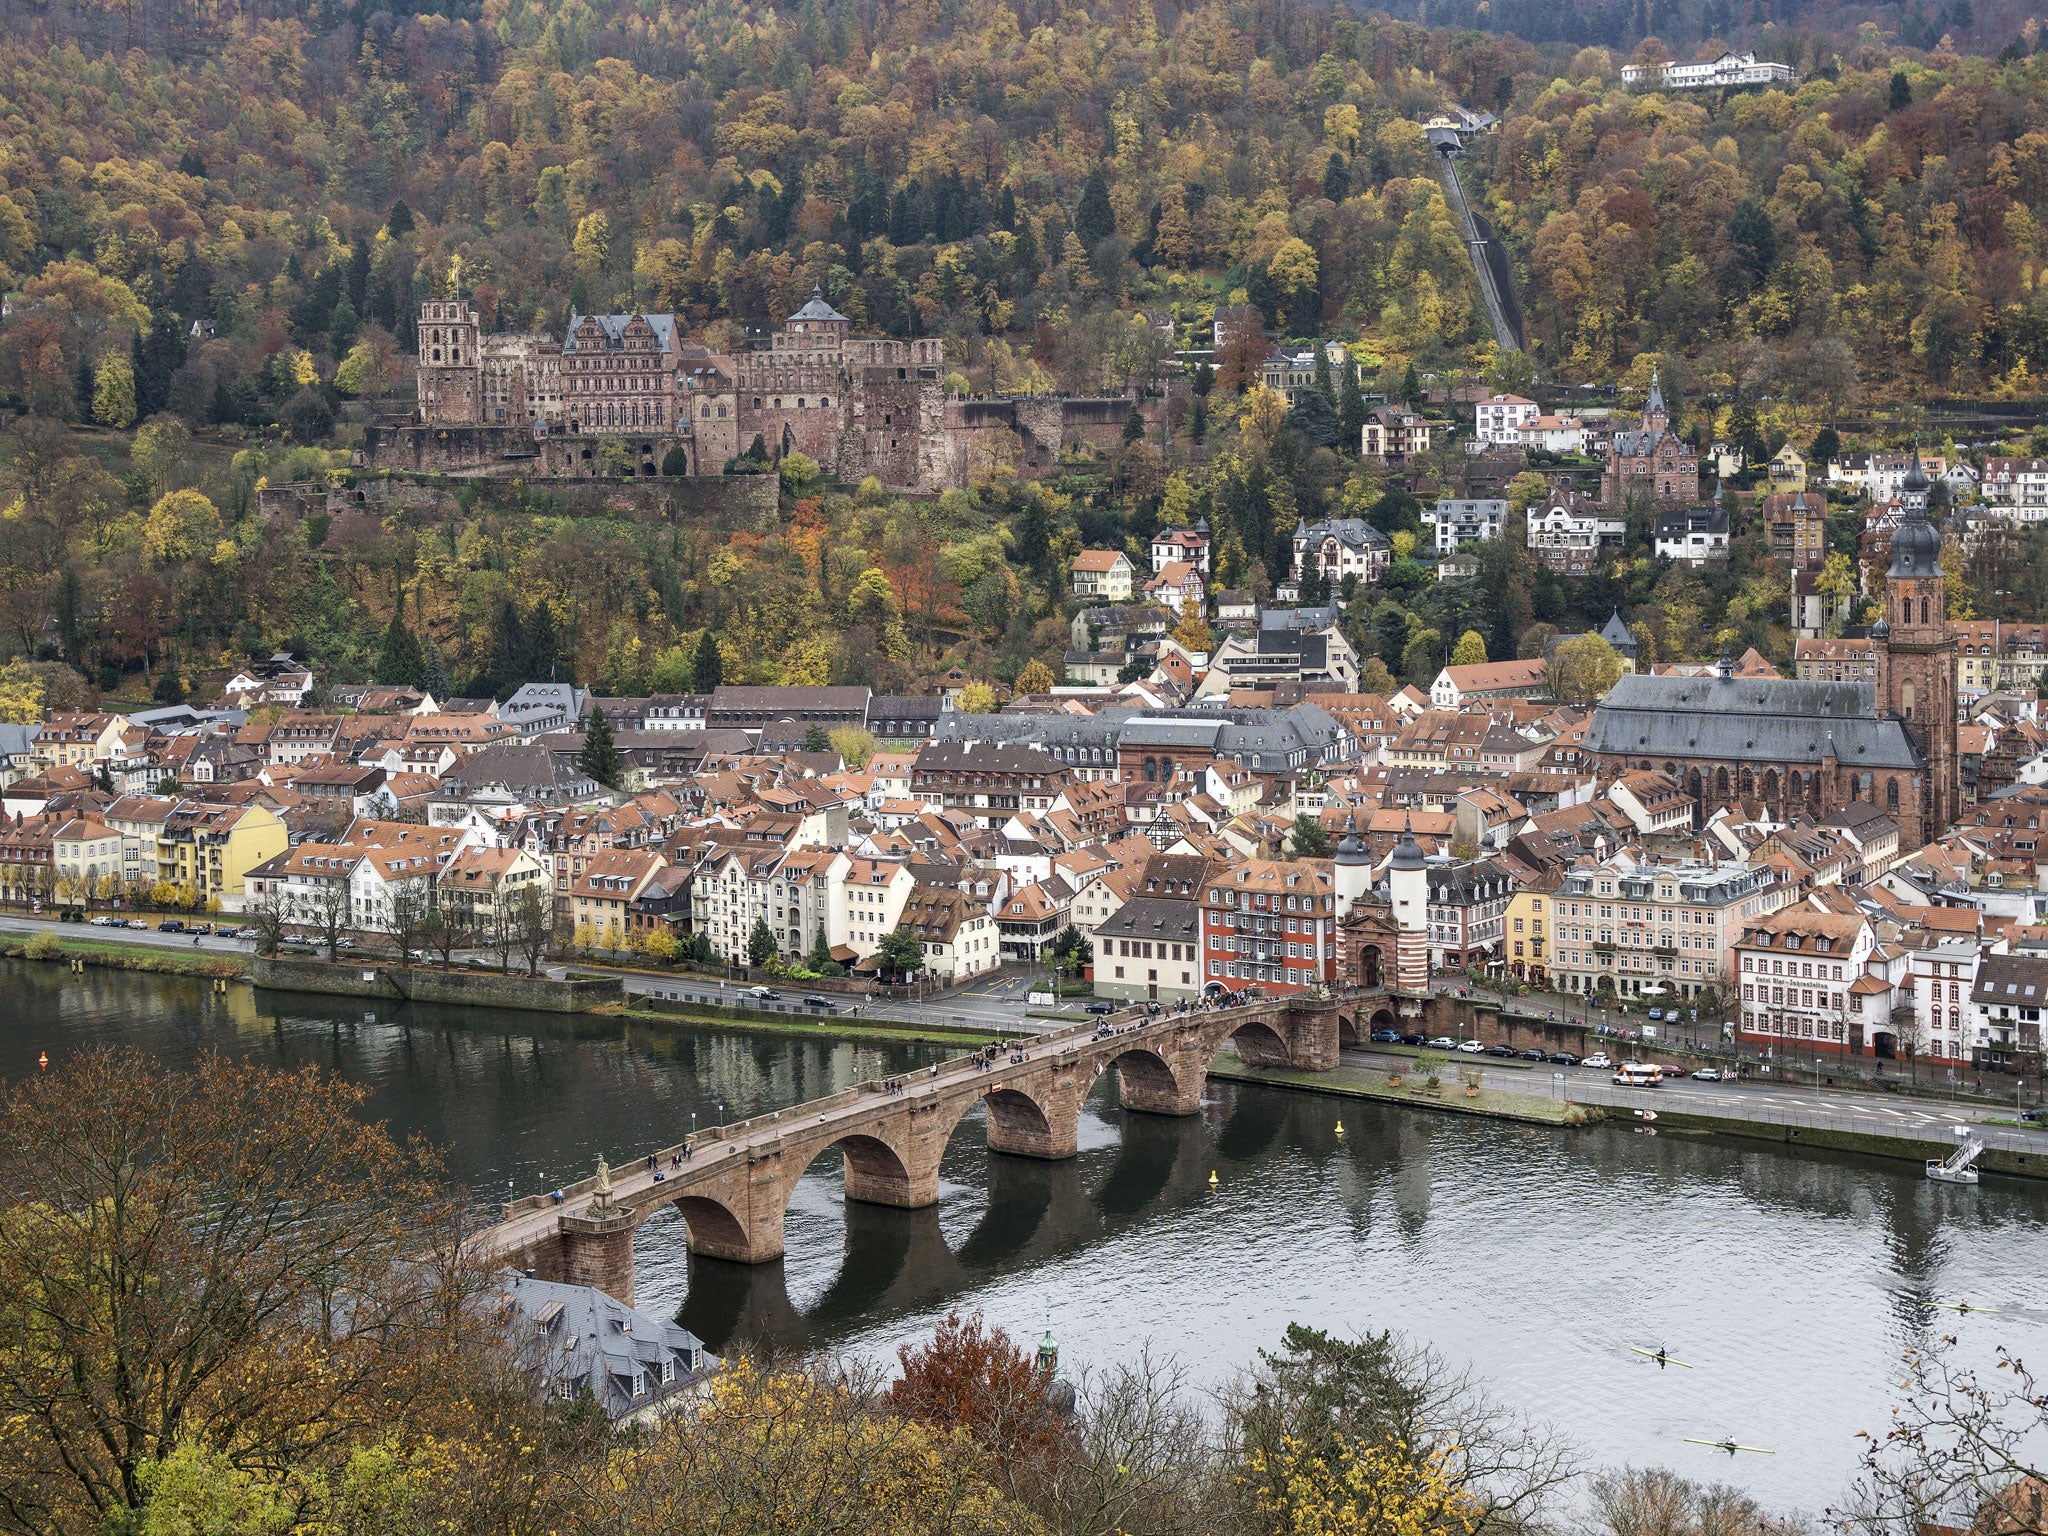 Heidelberg is a beautiful university town in the south-west of Germany